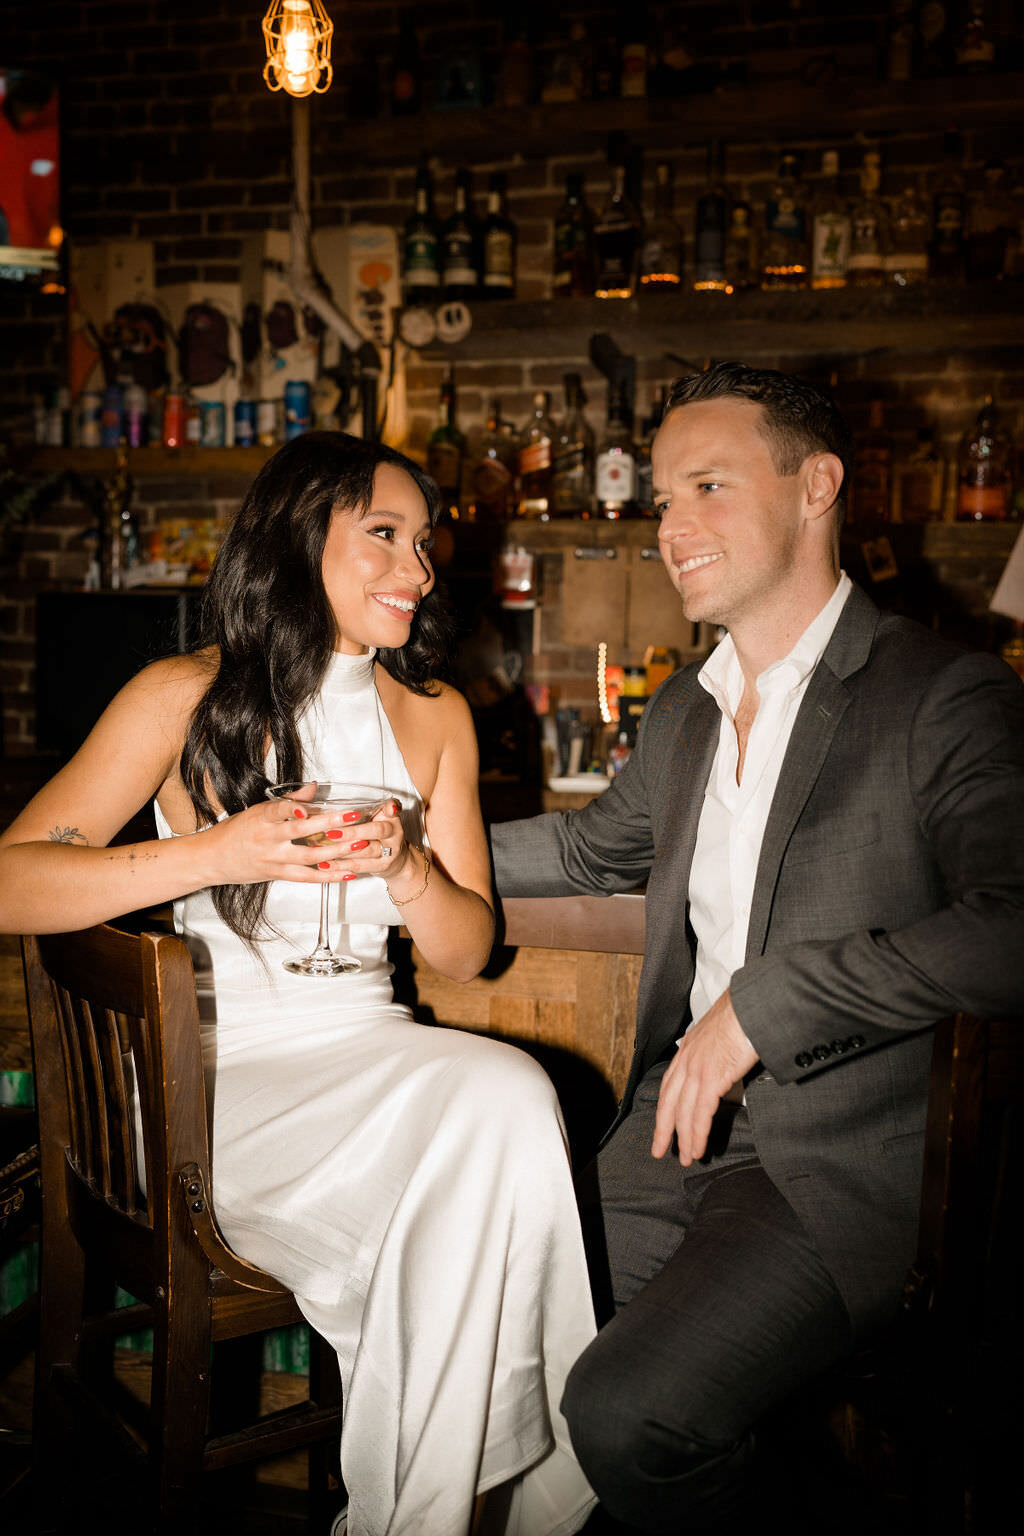 bride and groom sitting at a bar while the bride has a martini glass in her hand